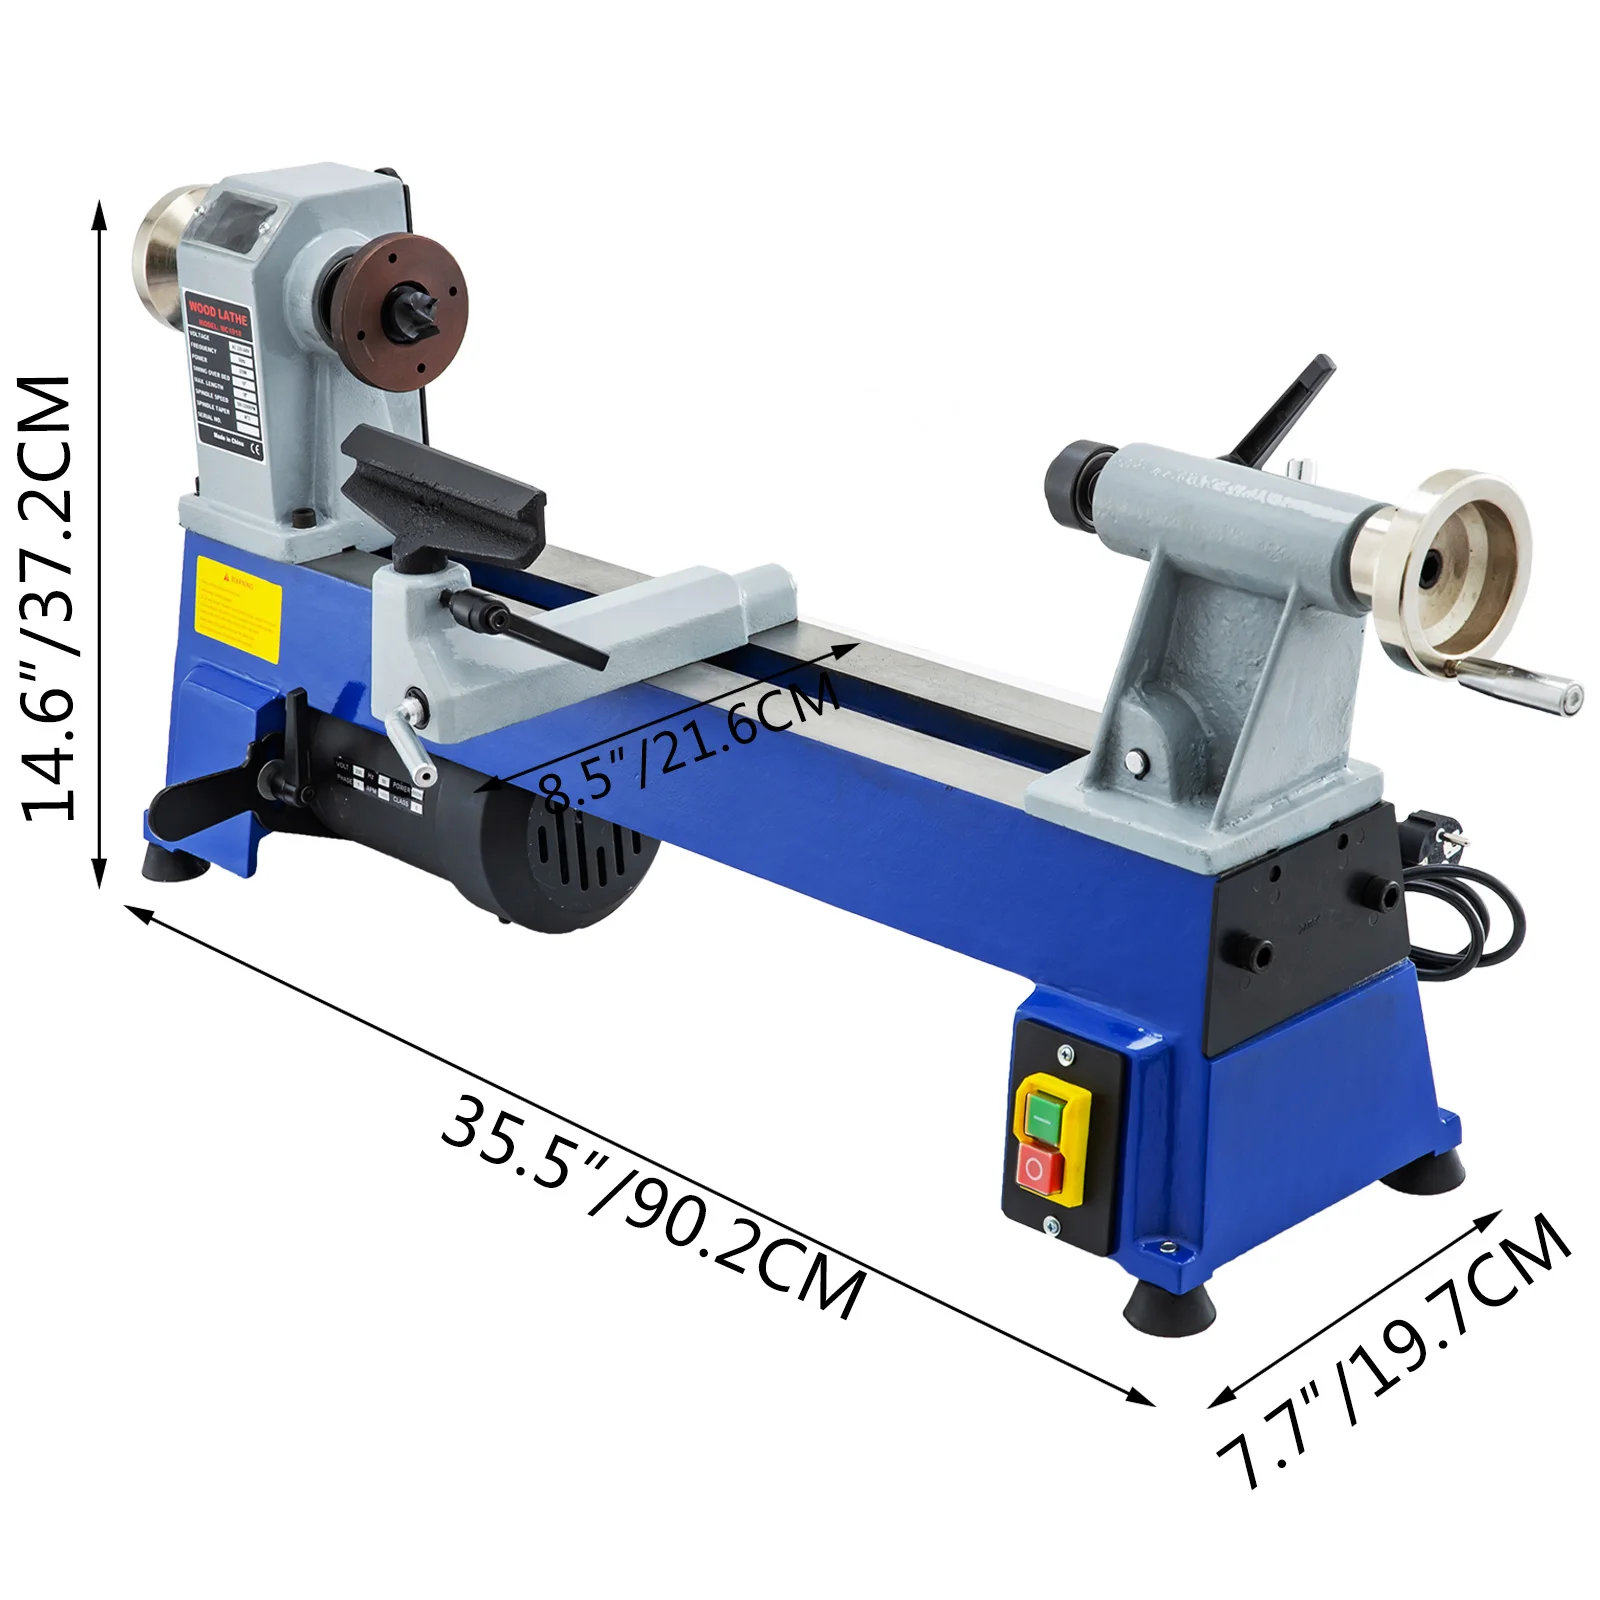 

VEVOR 10"x18" 12"x18" 500-3800RPM Variable Speed Mini Wood Metal Benchtop Lathe Machine w/ LED Light Low Noise for DIY Tower